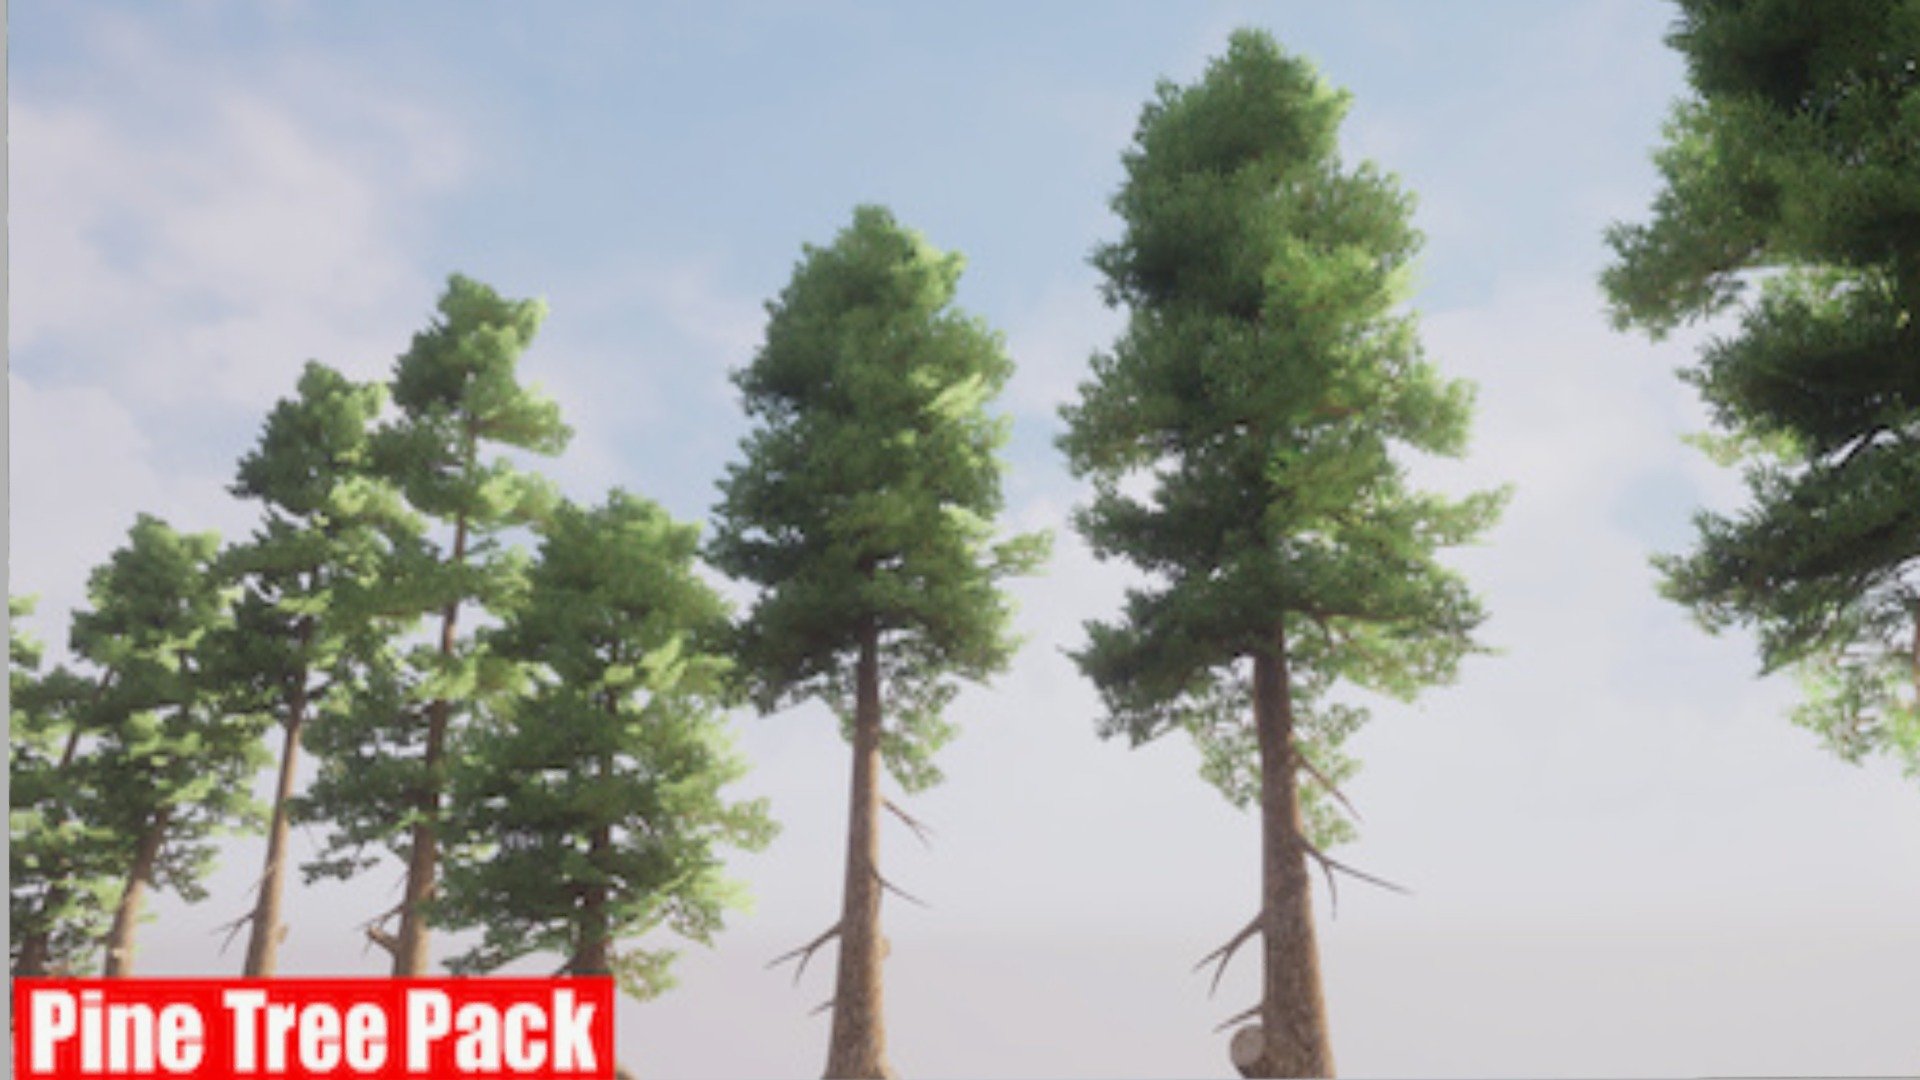 This pack contains:

16 Pine tree models for desktop platform (~7000 triangles) without roots

16 Pine tree models for desktop platform (~7000 triangles) with roots

16 Pine tree models for mobile platform (~2500 triangles) without roots - Realistic Pine Pack - Buy Royalty Free 3D model by Next Spring (@NextSpring) 3d model